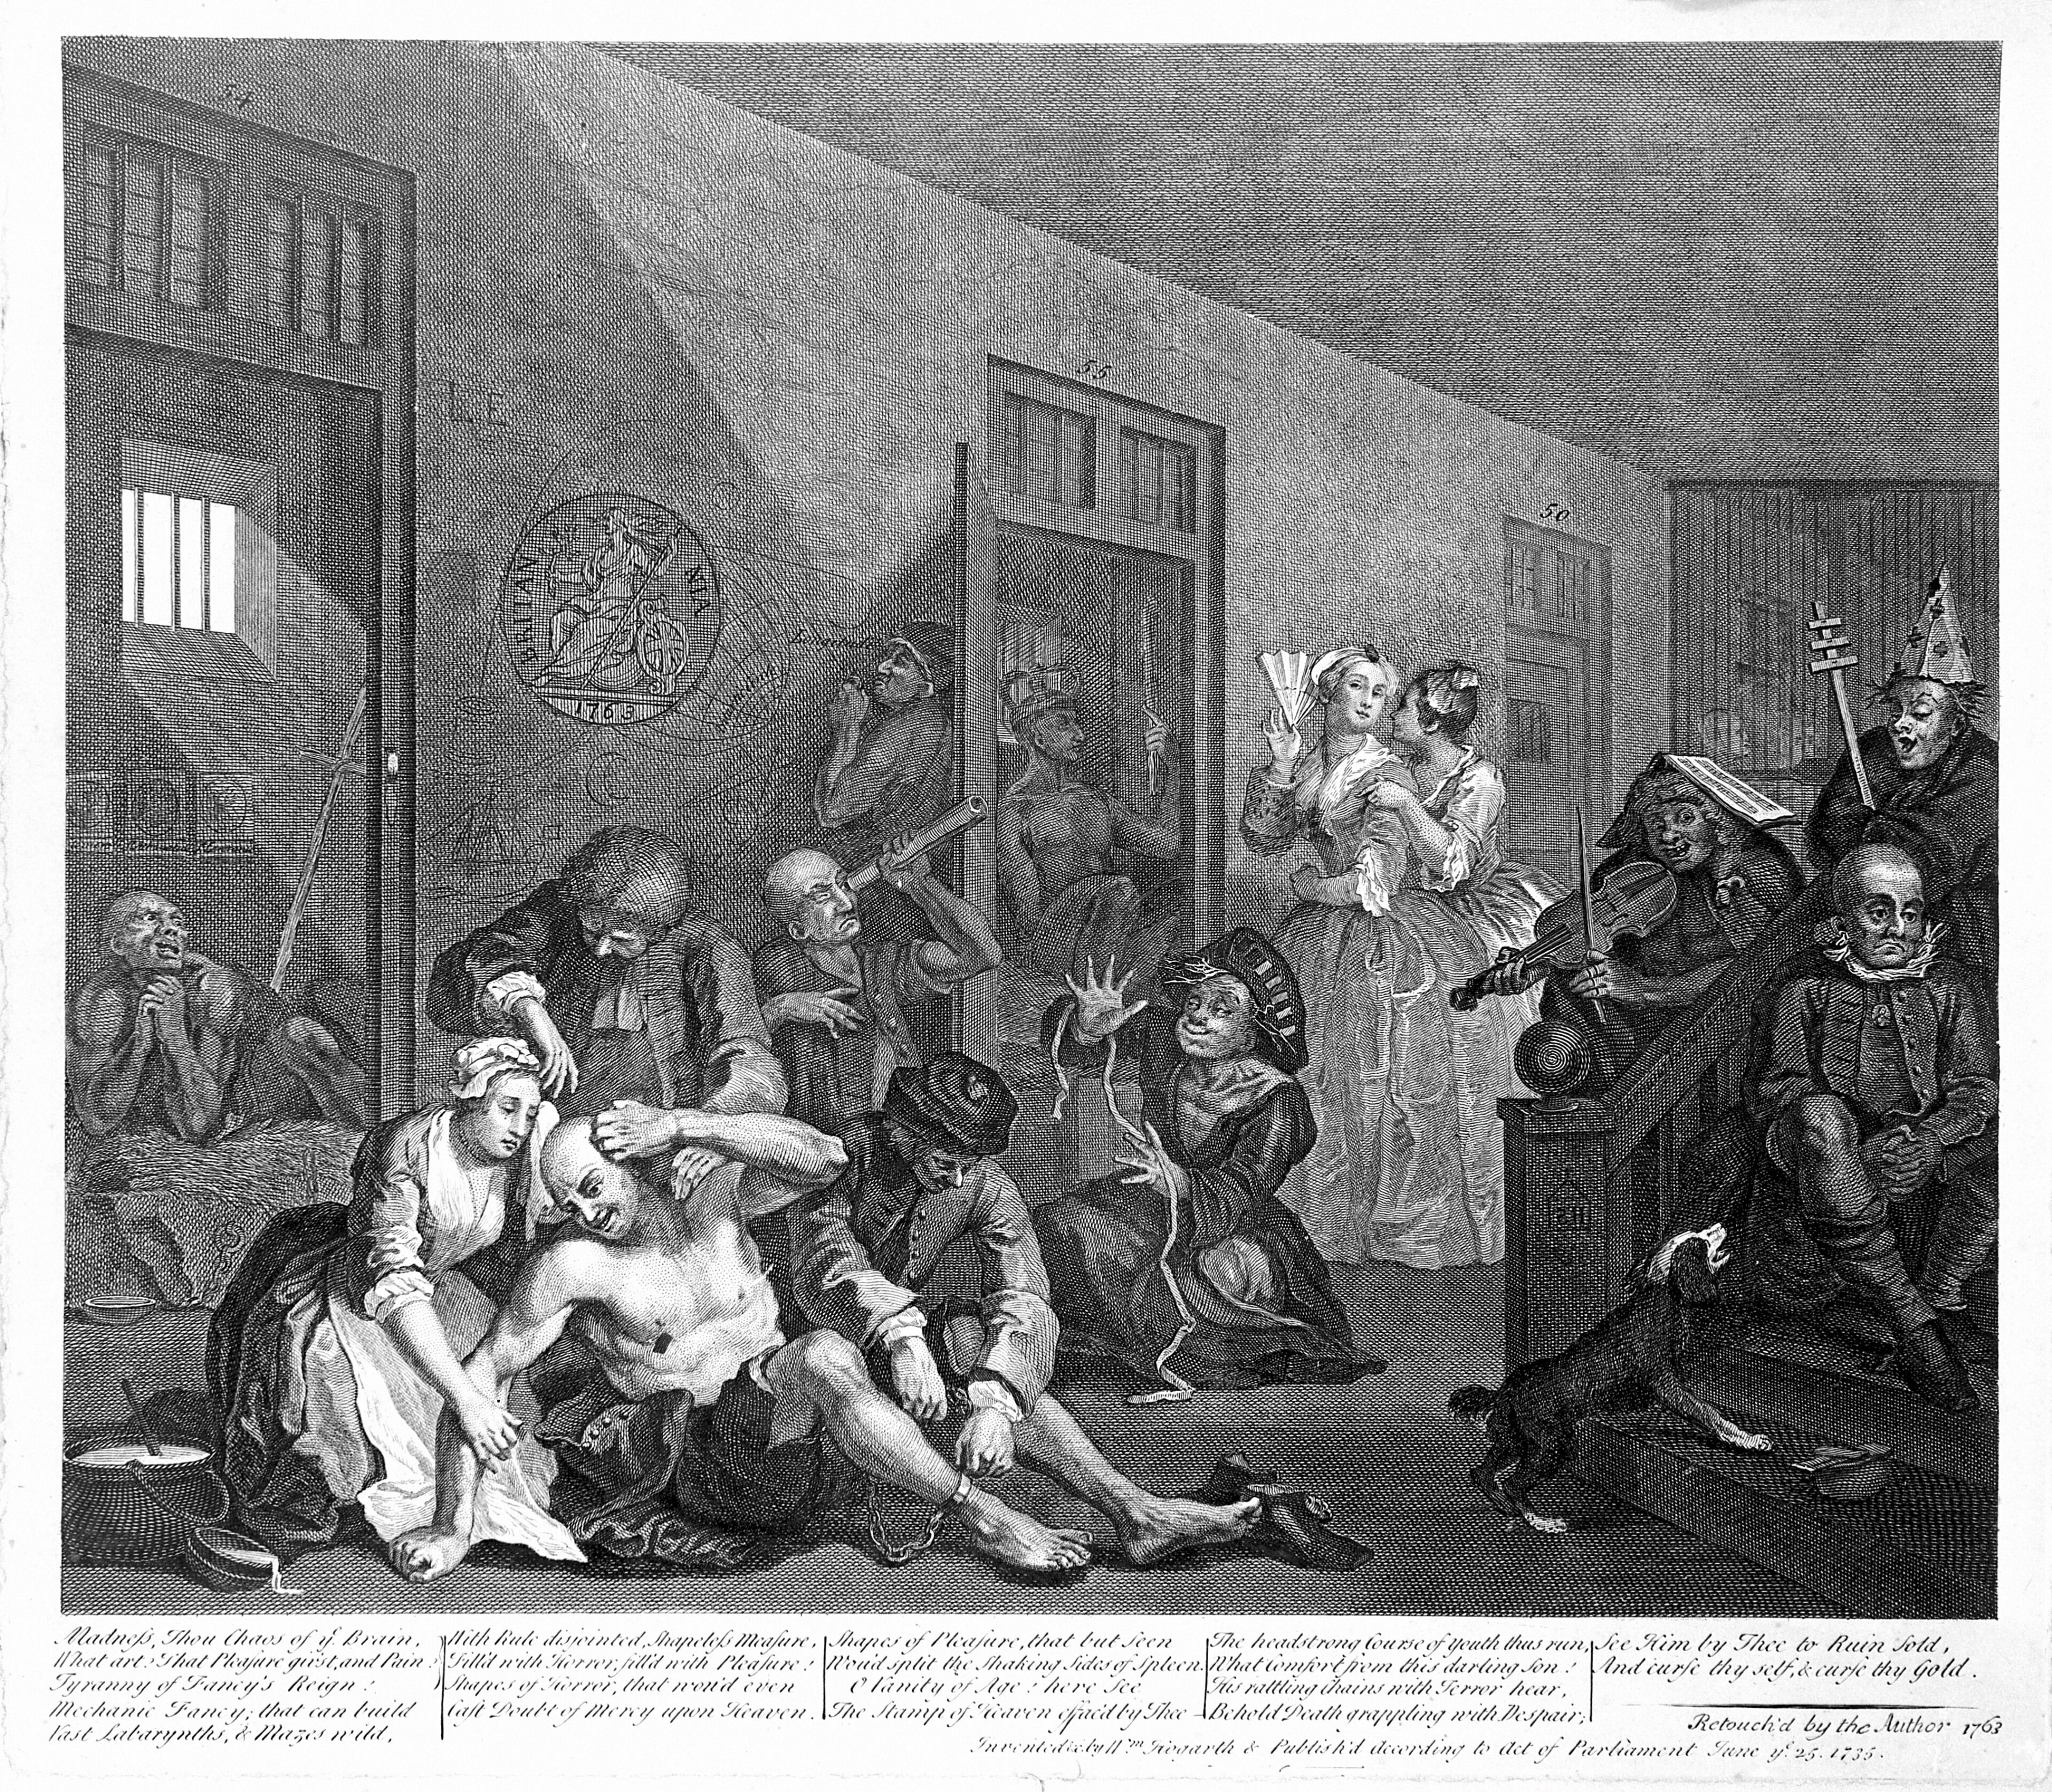 An insane man (Tom Rakewell) sits on the floor manically grasping at his head, his lover (Sarah Young) cries at the spectacle while two attendants attach chains to his legs; they are surrounded by other lunatics at Bethlem hospital, London. Engraving by W. Hogarth, 1763.